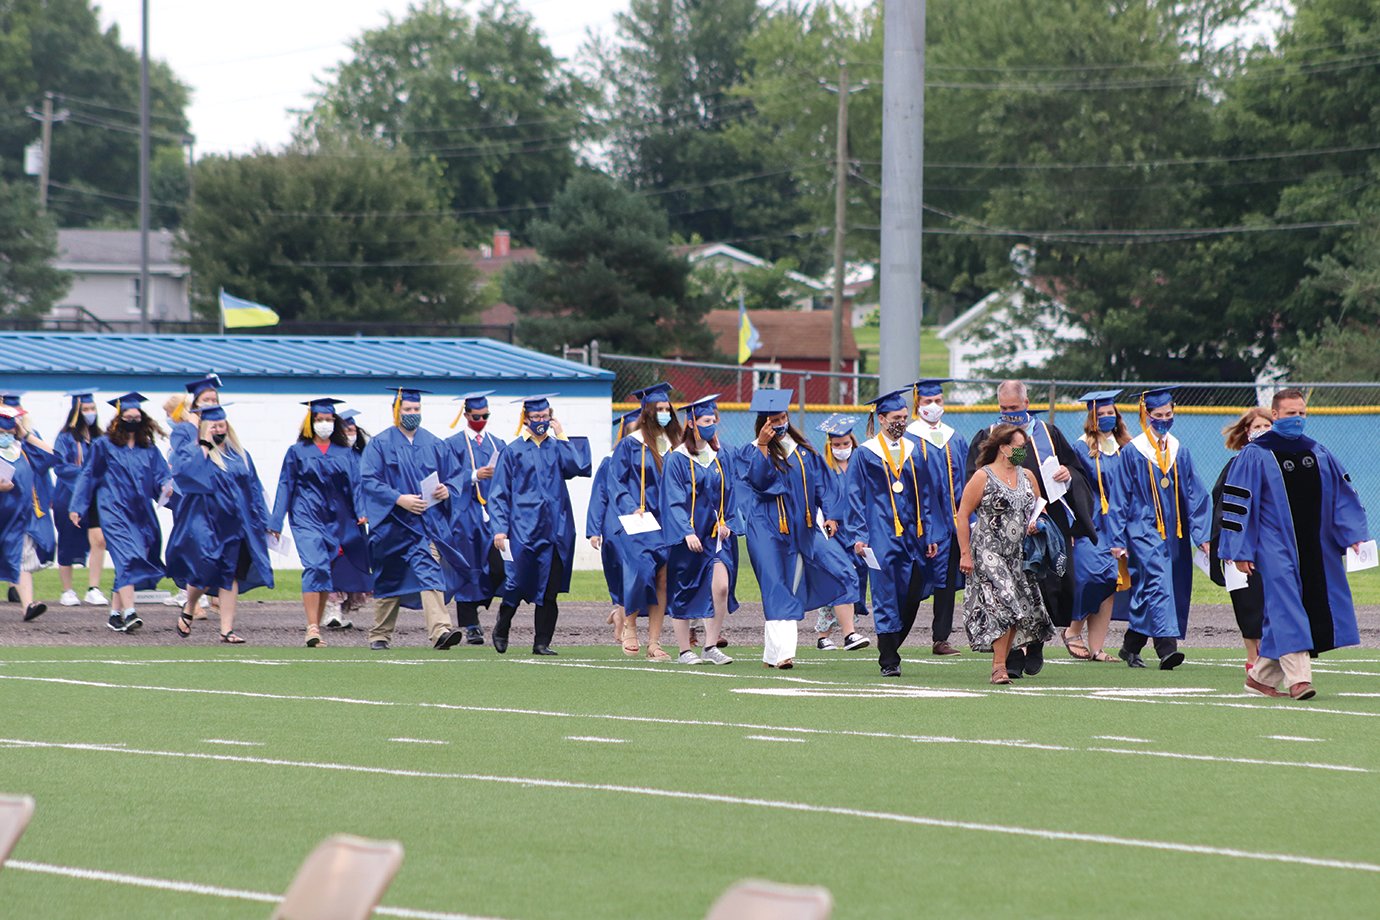 Graduating Athenians enter with Pomp and Circumstance on Saturday to finally take part in long-delayed 2020 graduation ceremonies.